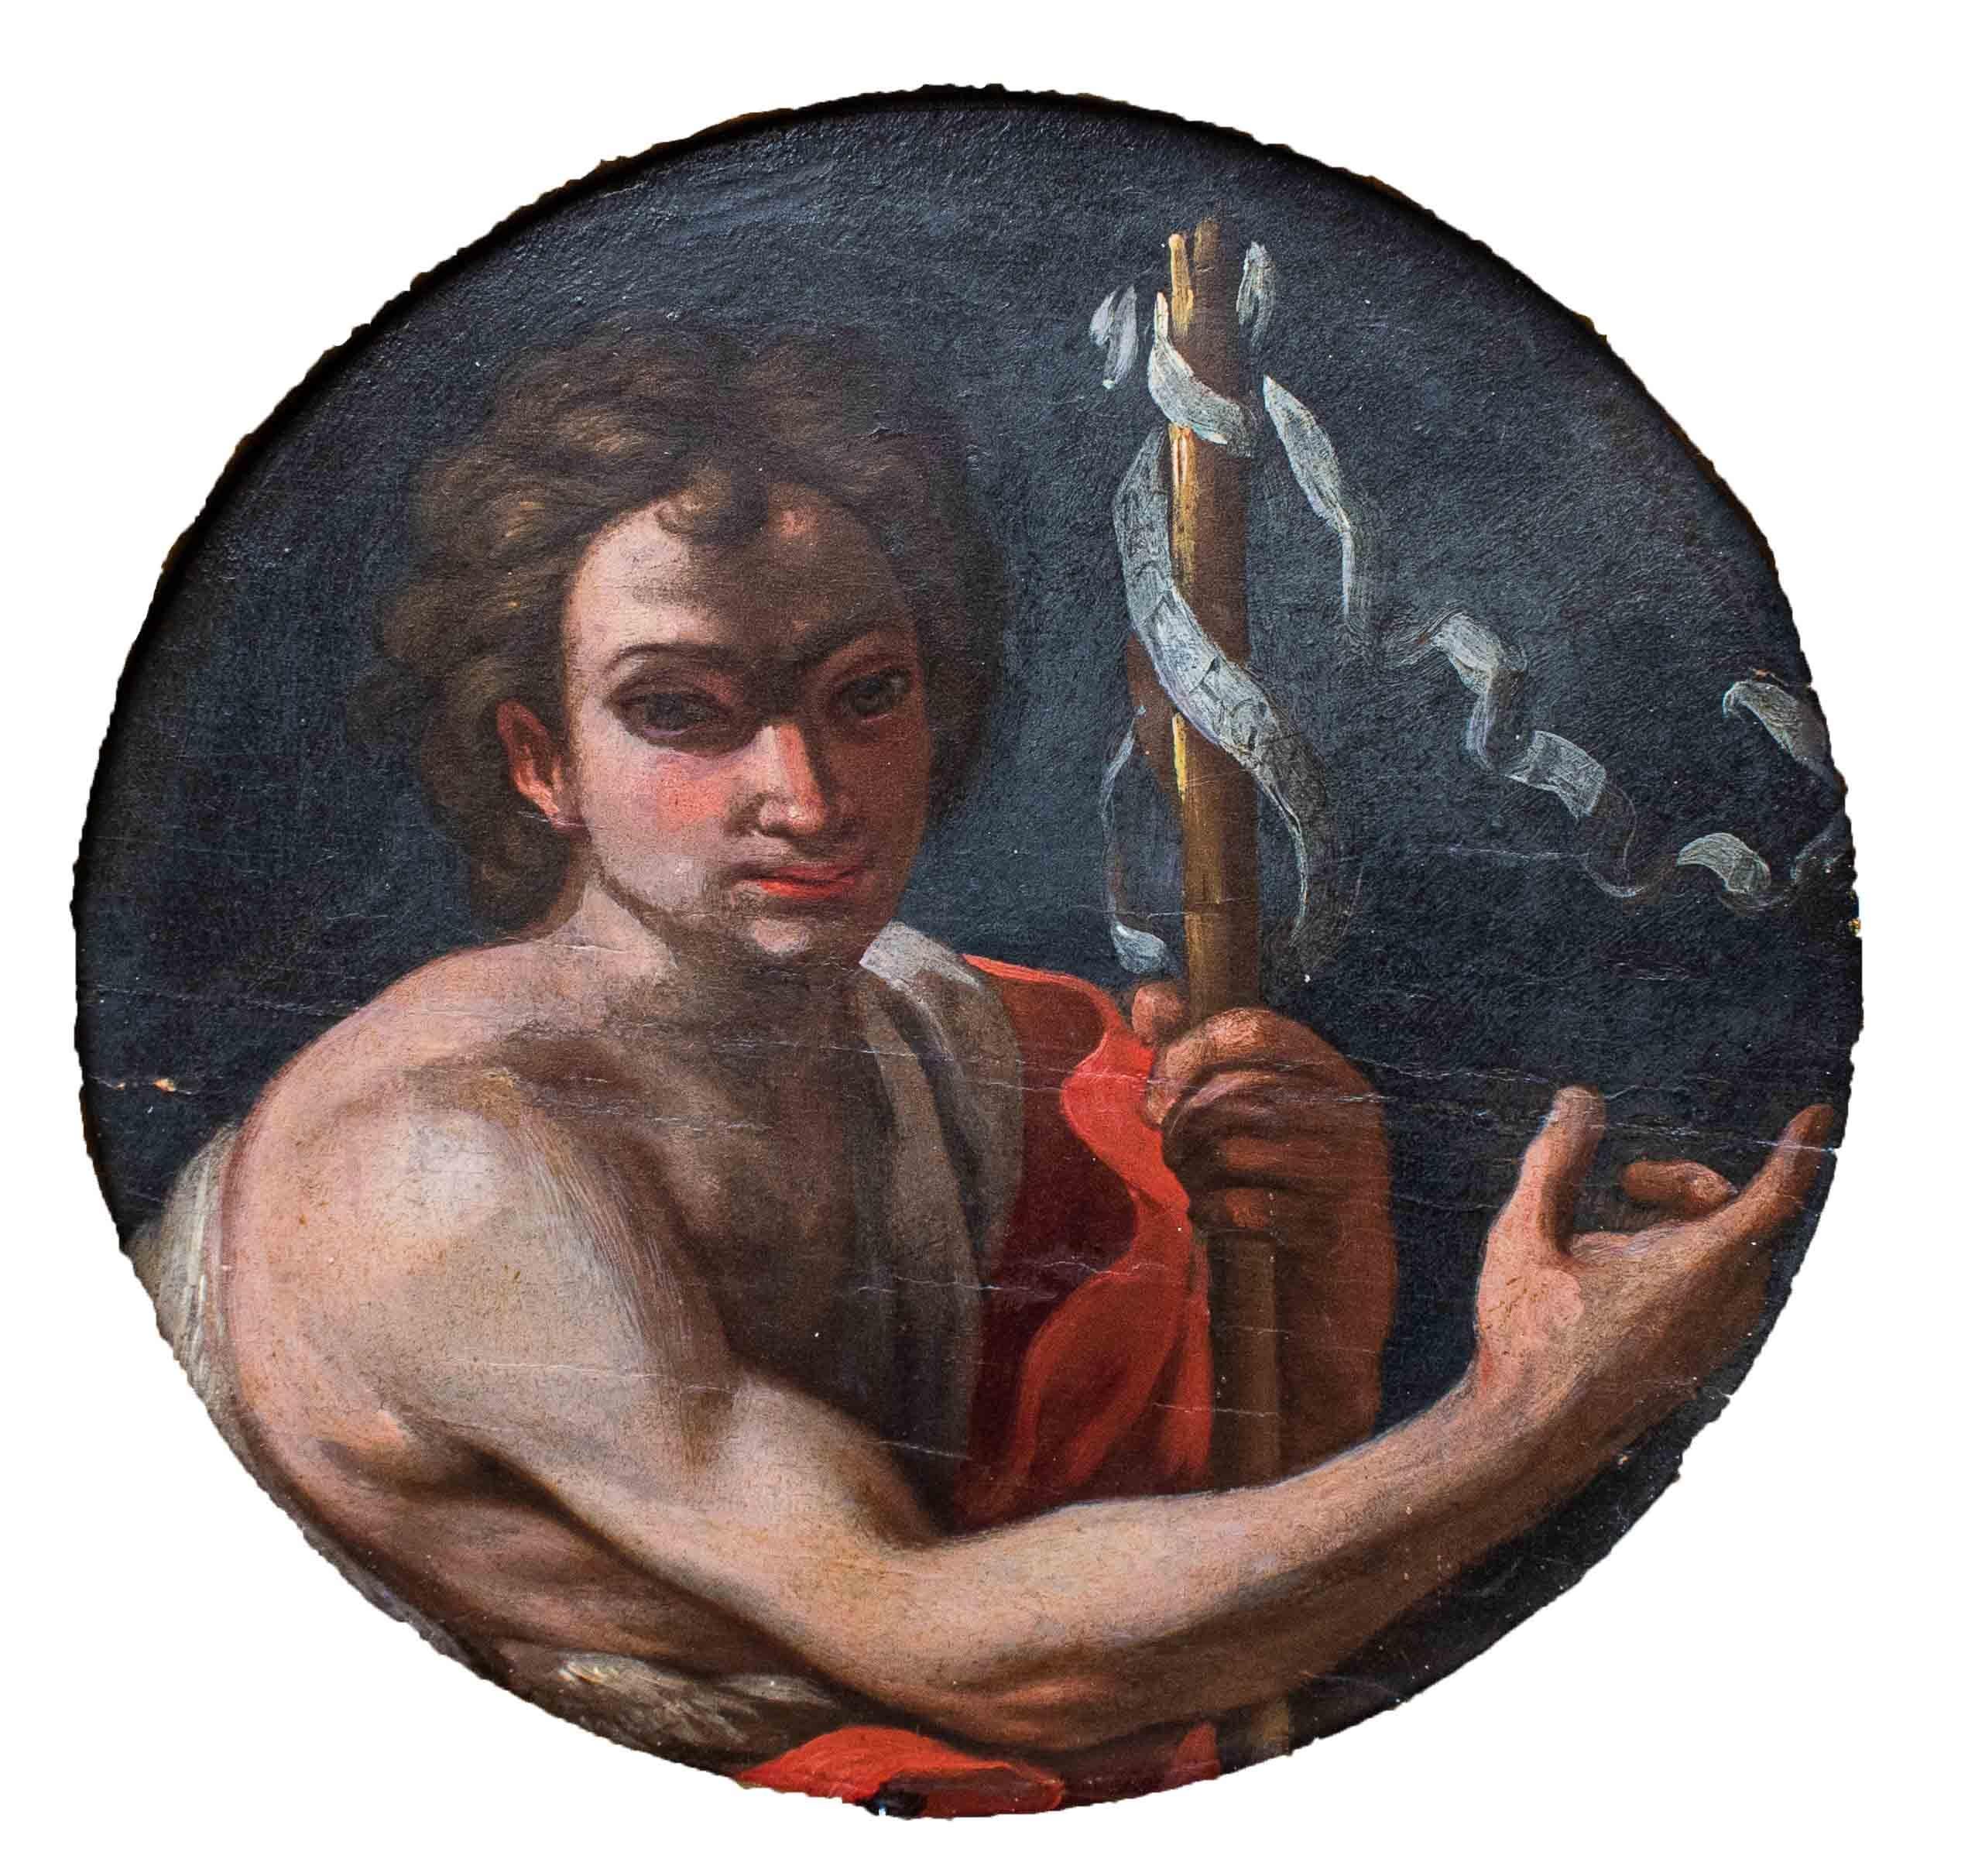 Florentine school, 17th century
St. John Baptist
Oil on canvas, diameter cm 20 - with frame diameter 30

In this small round-format canvas, St. John the Baptist is depicted half-length with his typical infant iconography, dressed in poor clothes